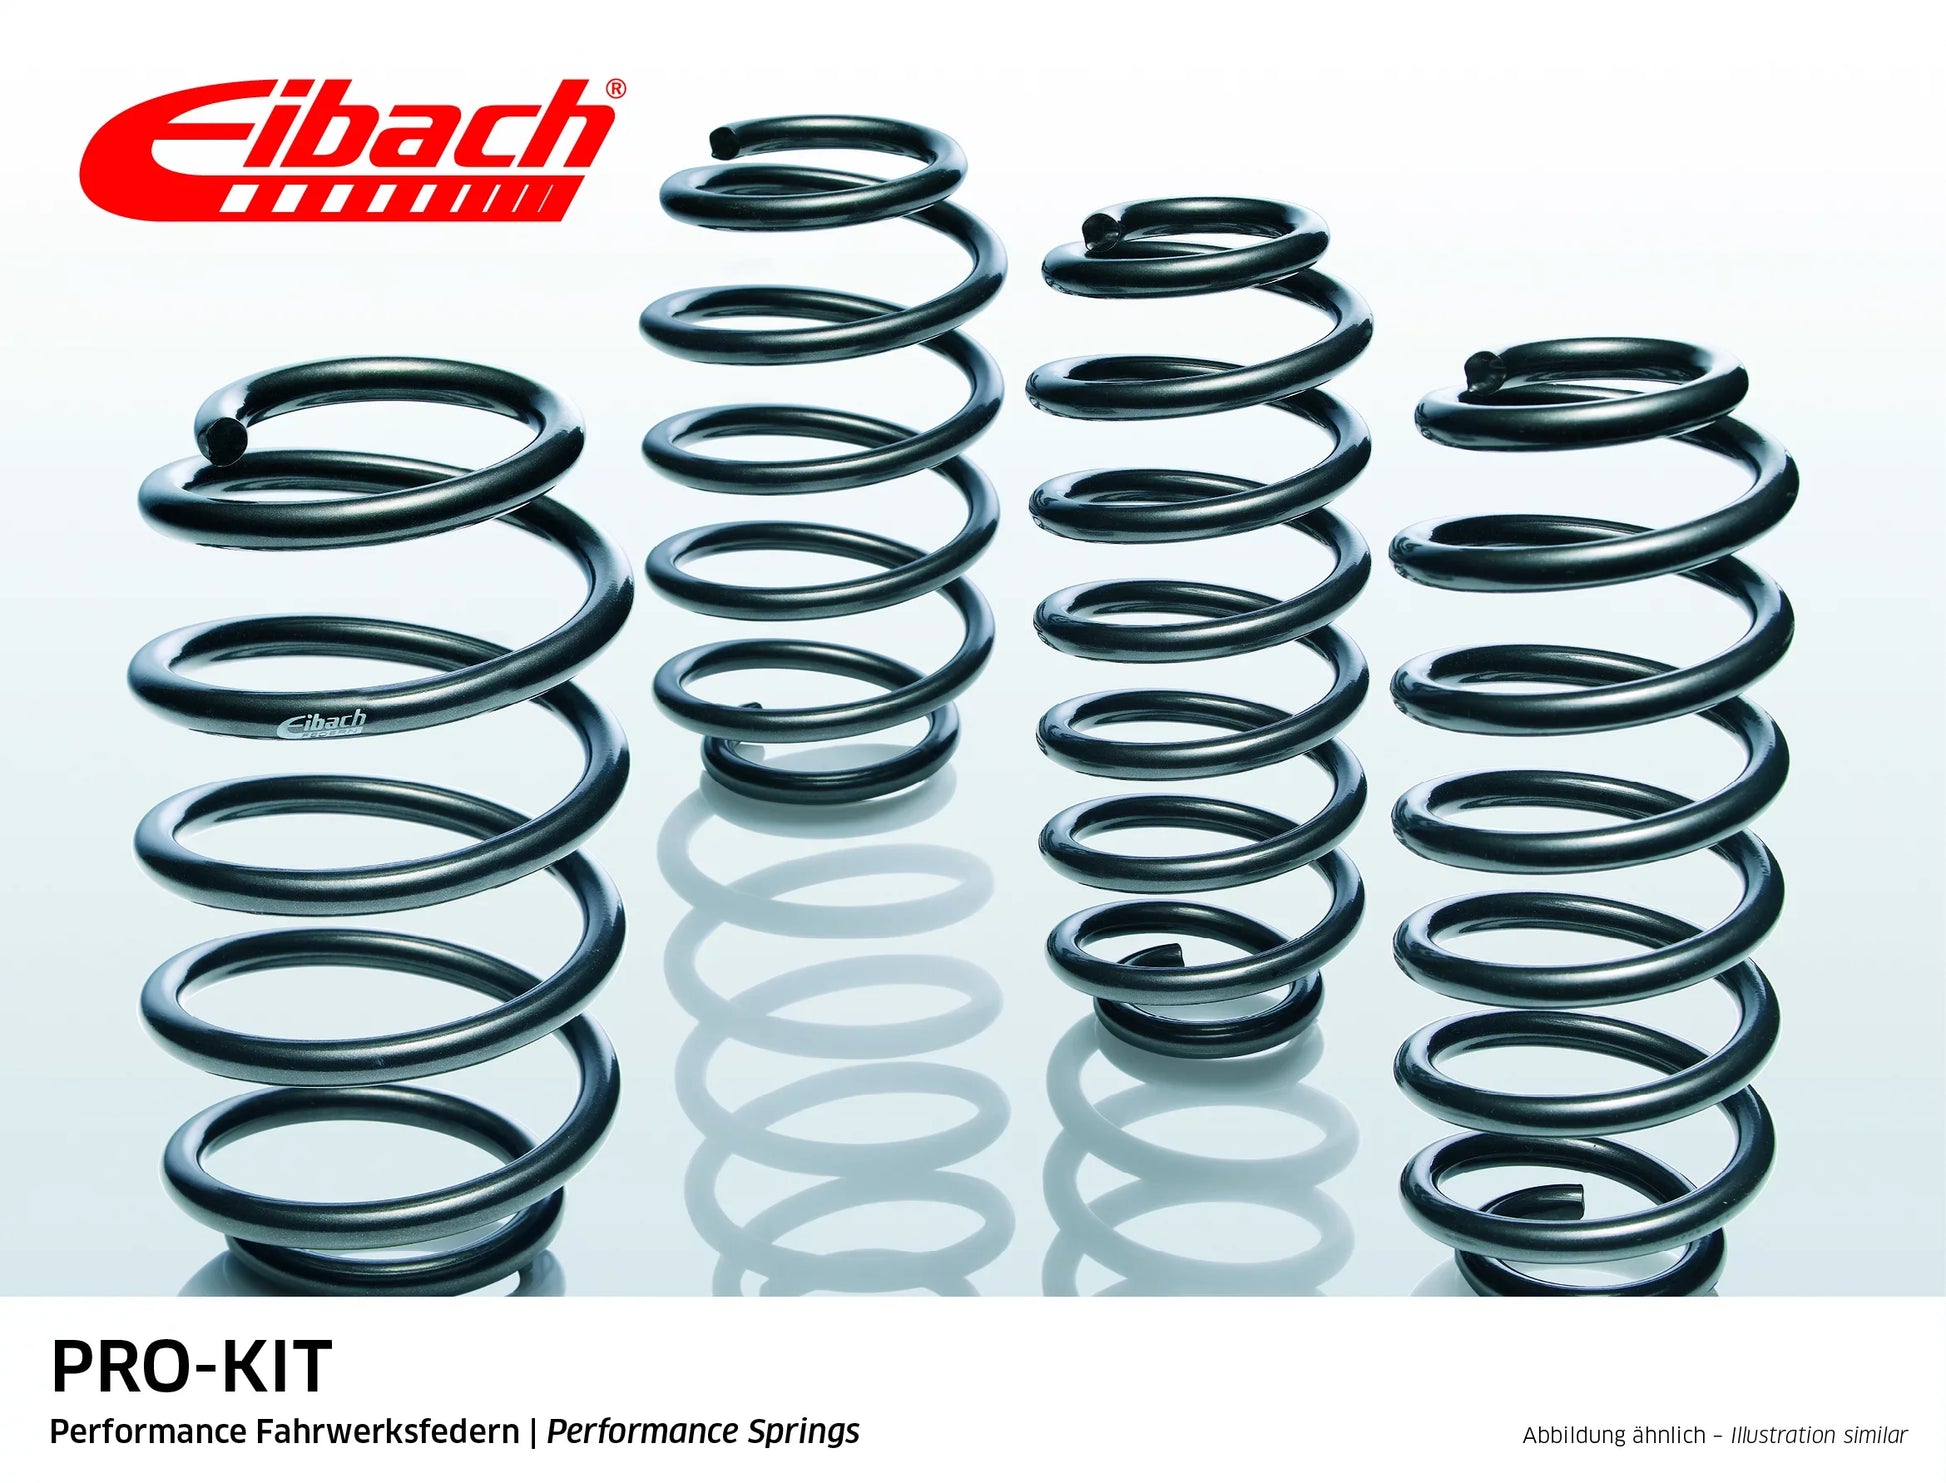 Eibach Pro-Kit Lowering Springs (E10-42-052-03-22) at £283.00